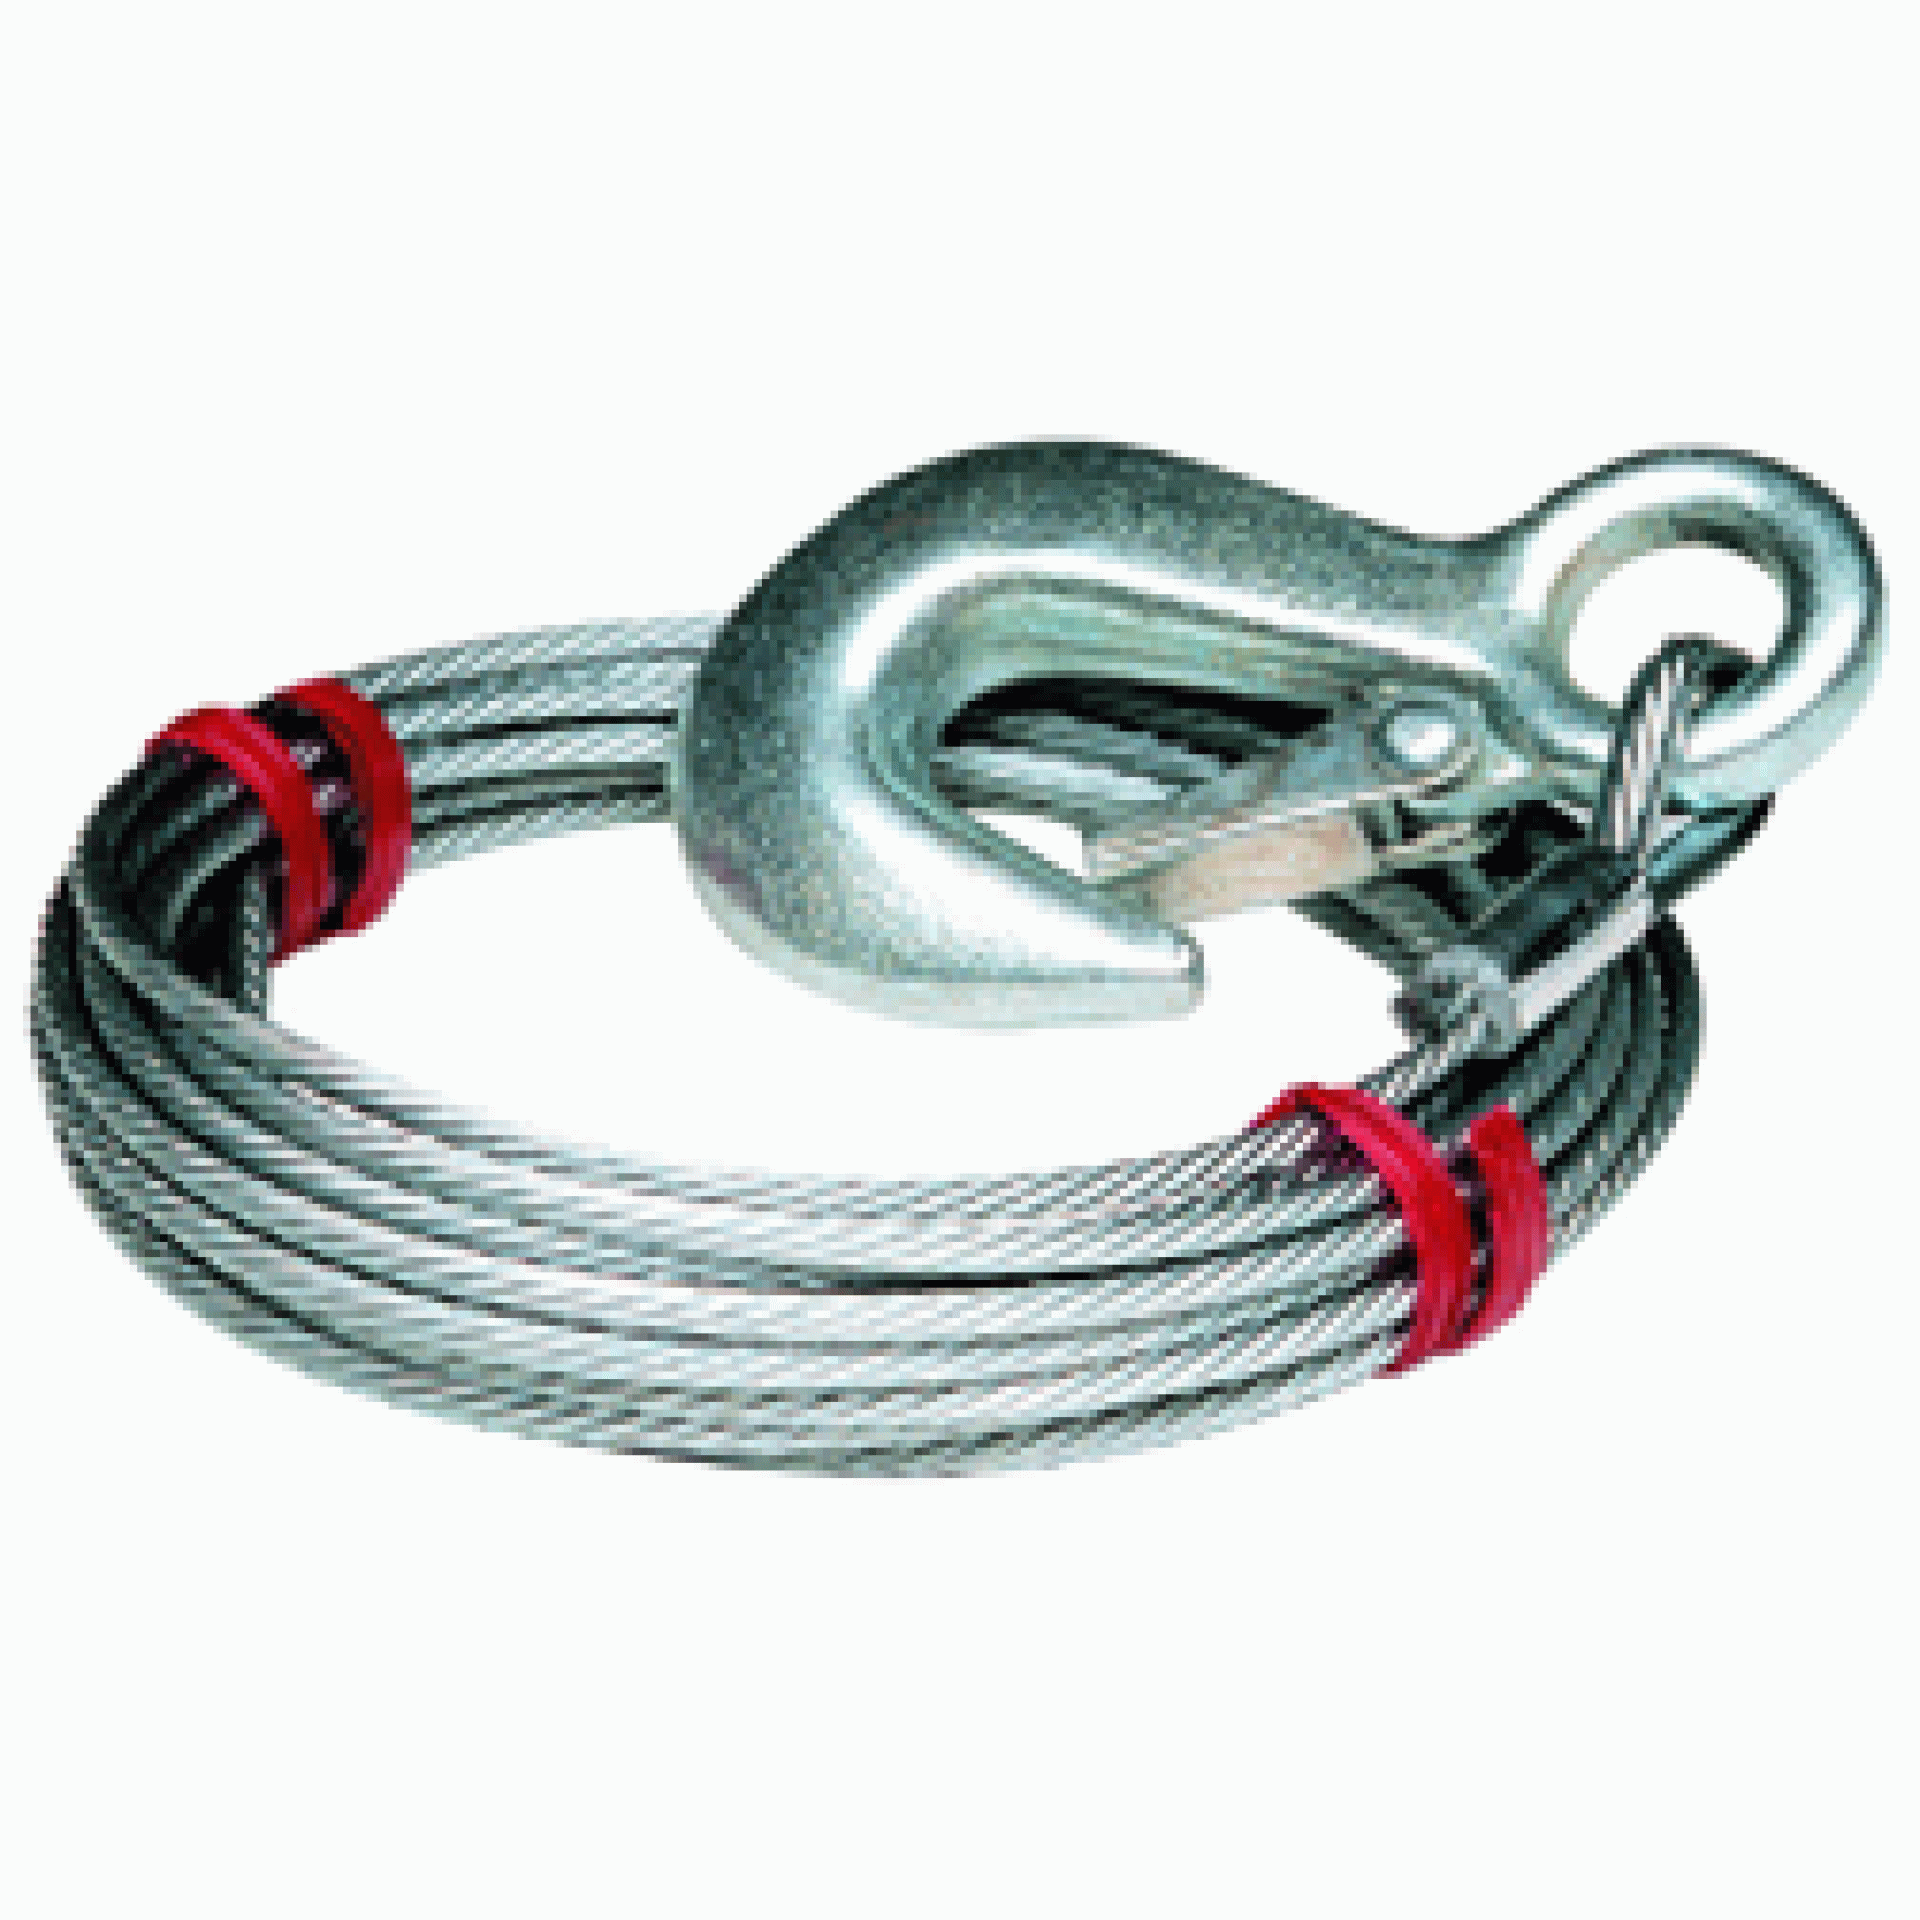 TIE DOWN ENGINEERING INC | 59400 | WINCH CABLE 7/32" X 50' 5600 LB FIT VS190 VR212 PW